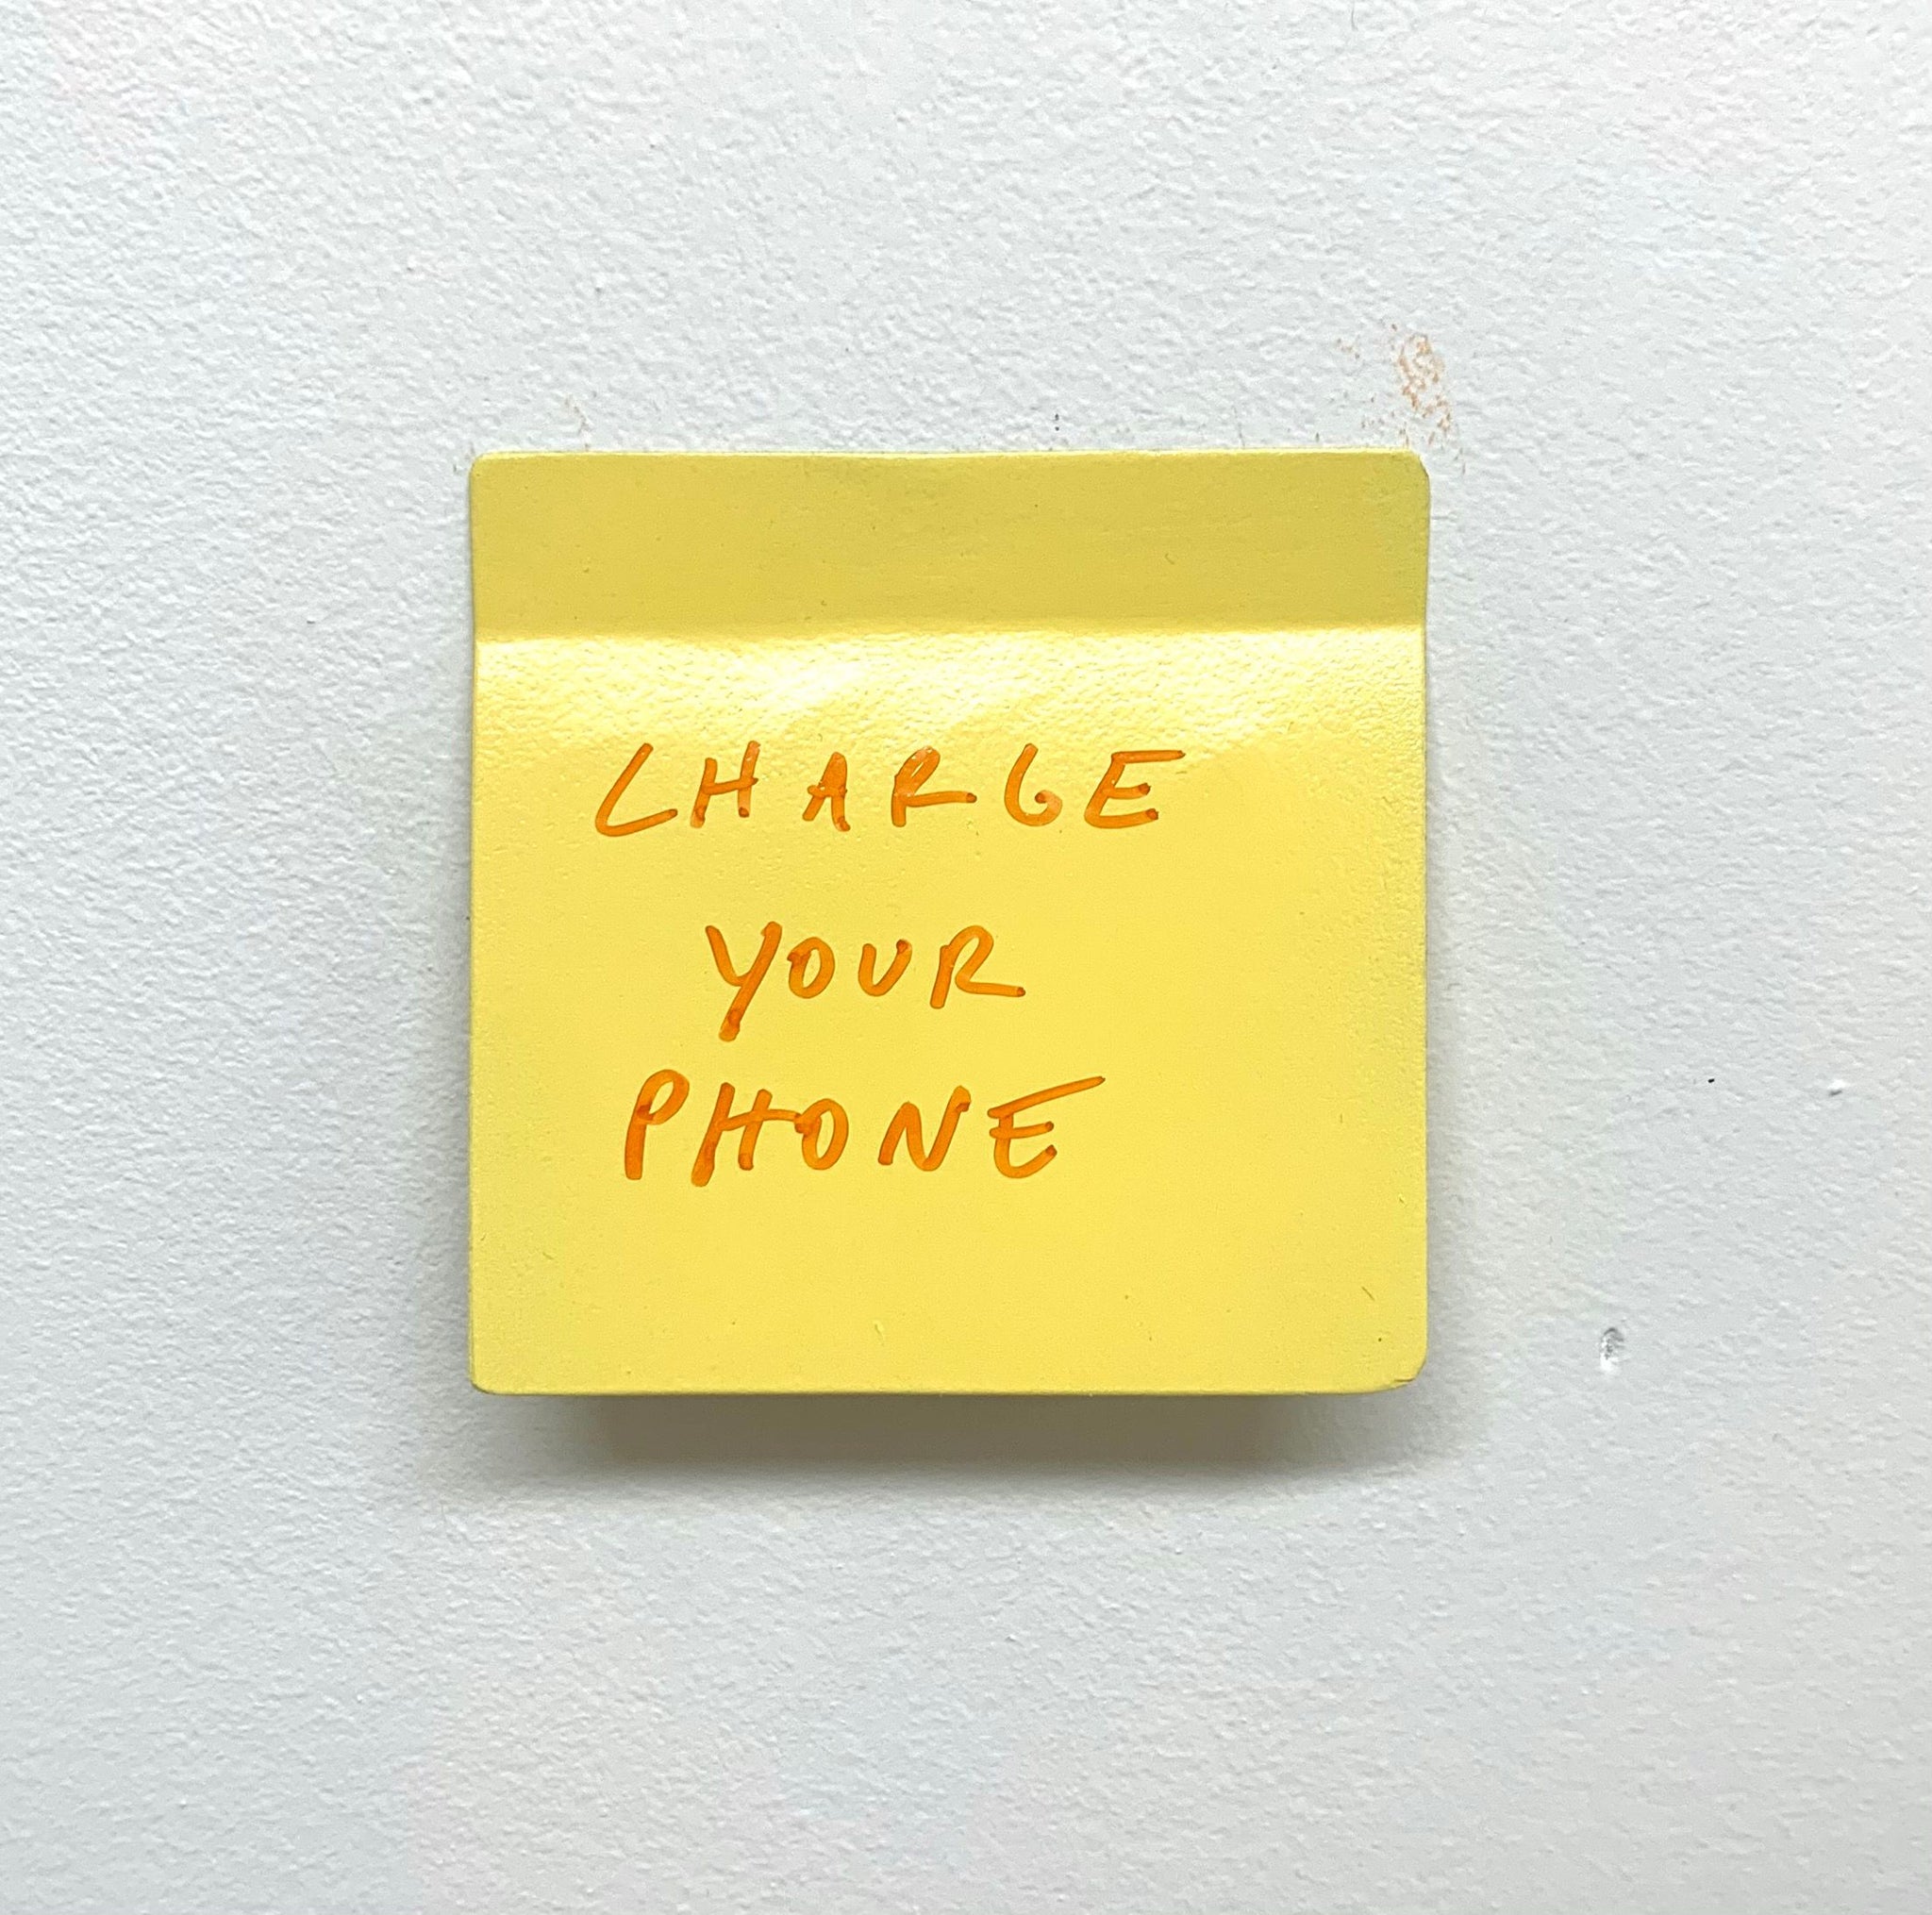 Stuart Lantry, "Charge your phone" SOLD